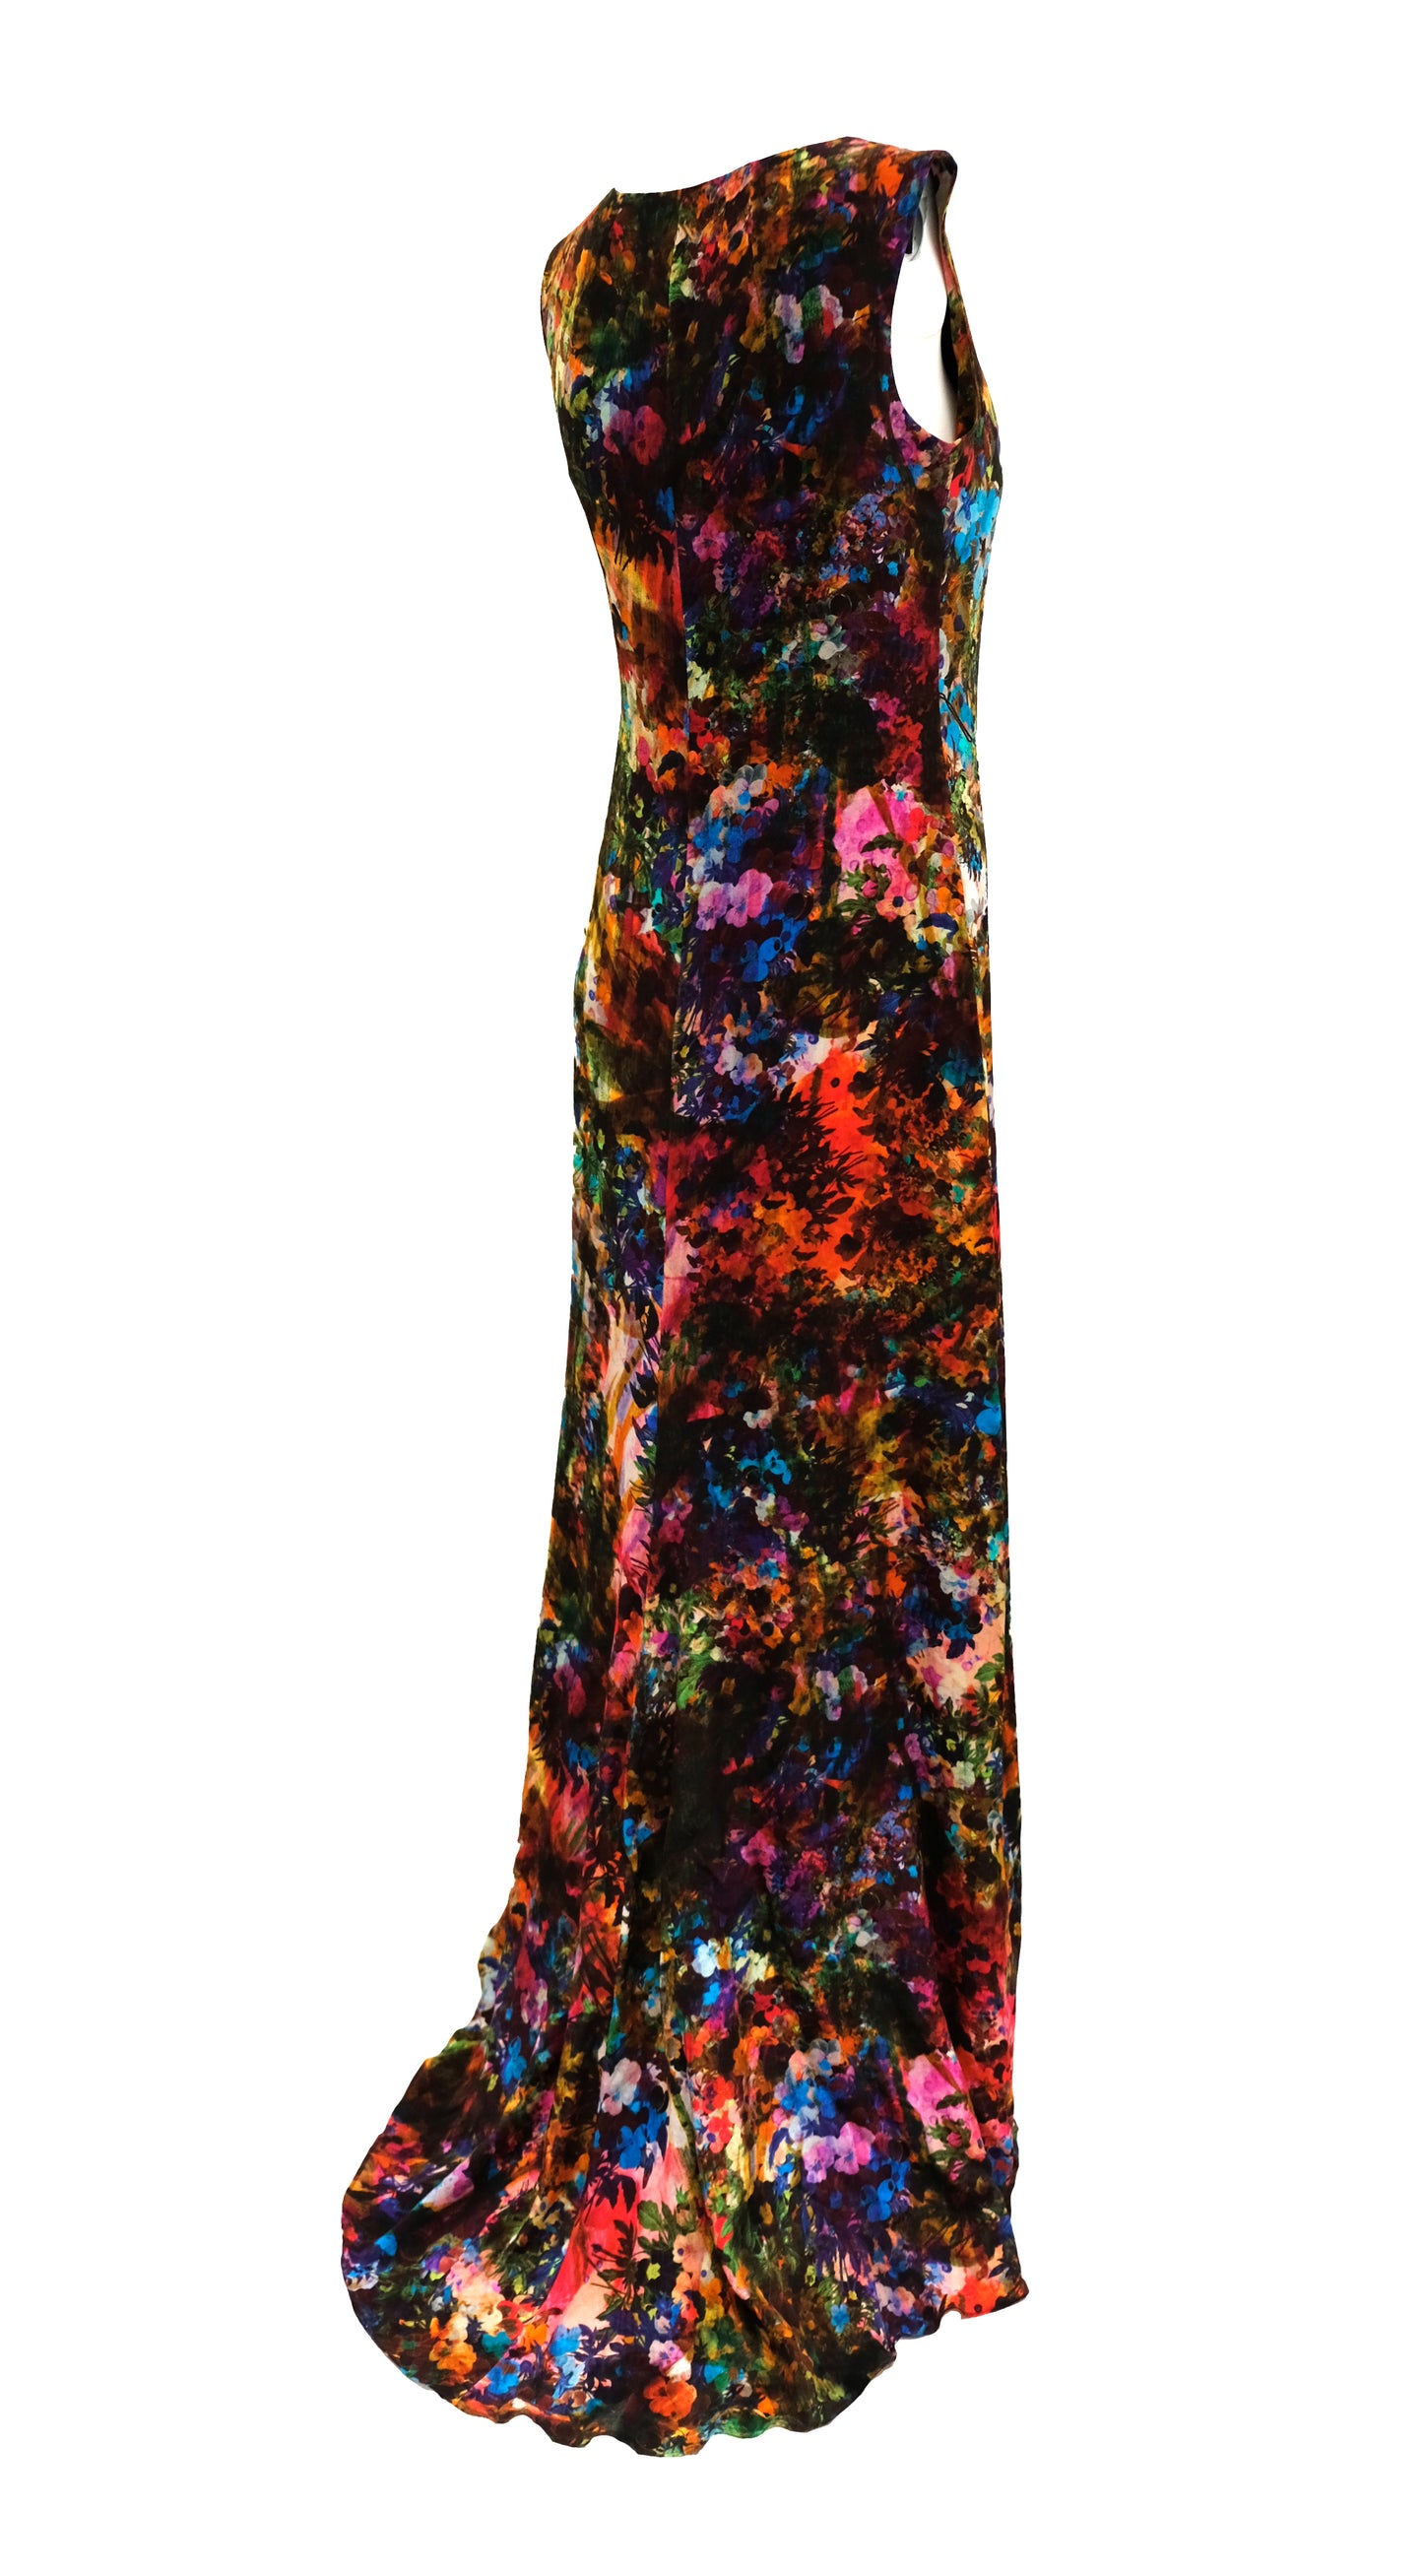 Erdem Evening Gown in Floral Silk with Matching Stole, UK8